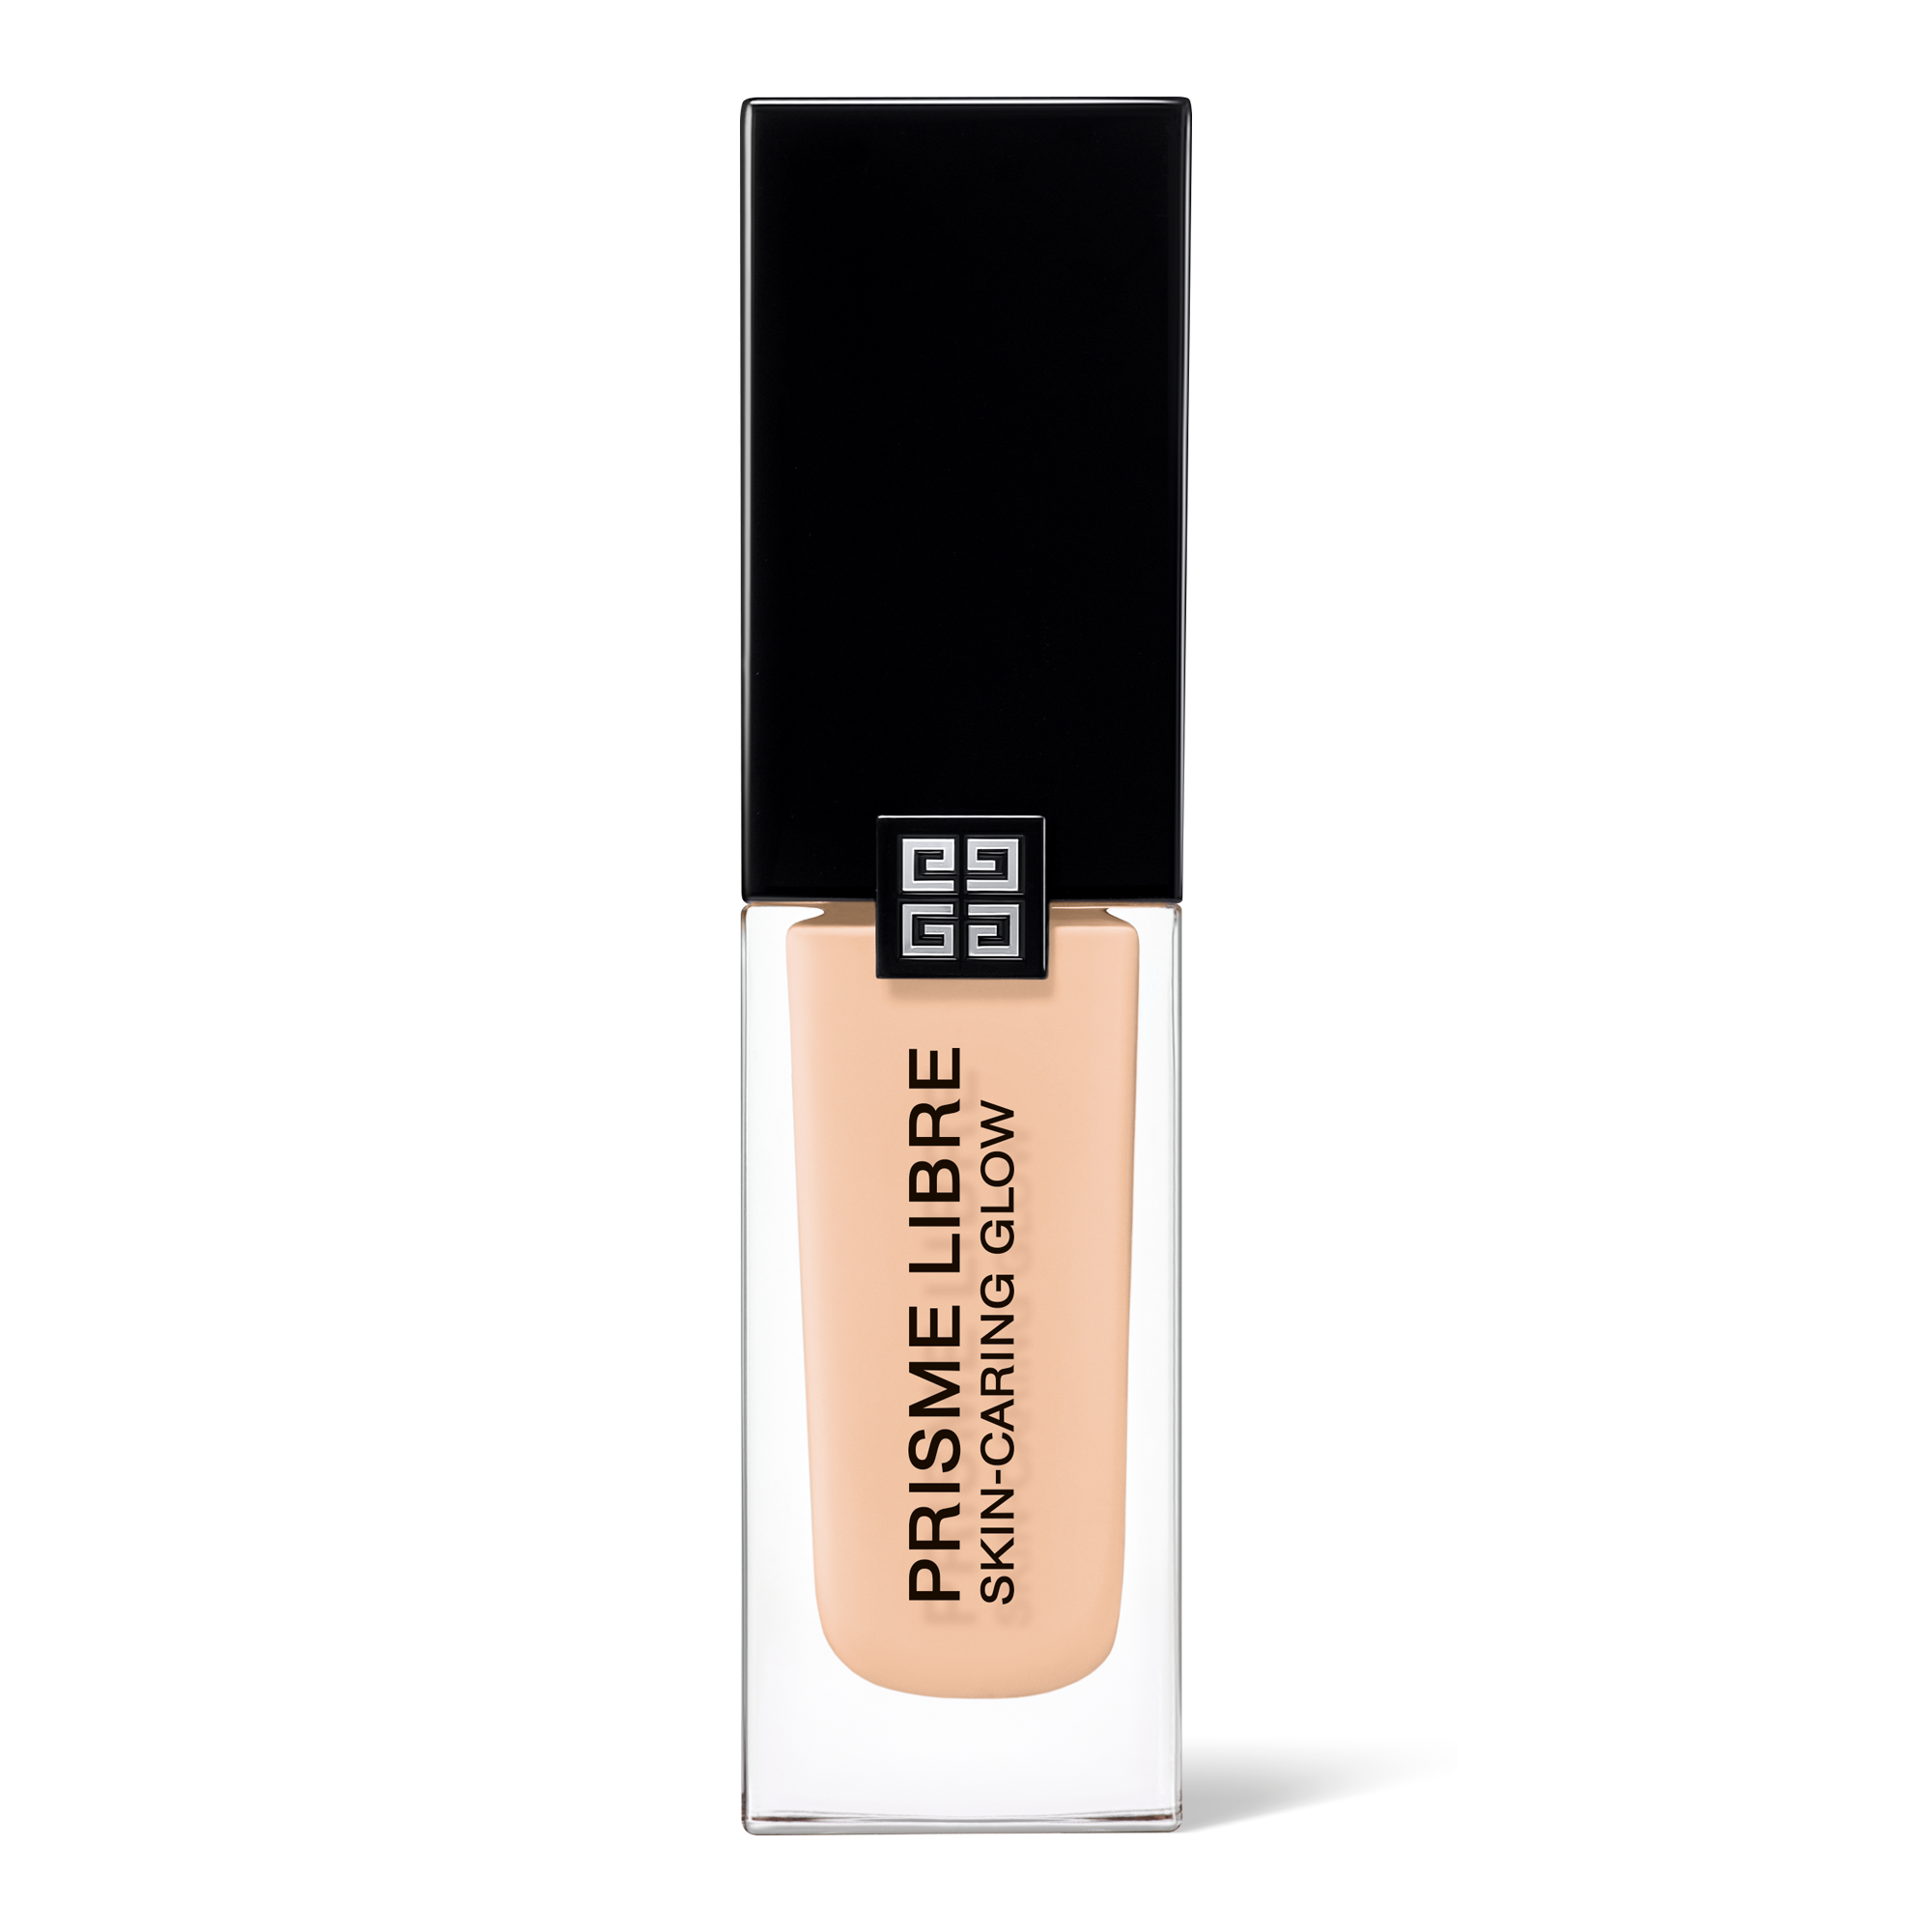 givenchy foundation for mature skin